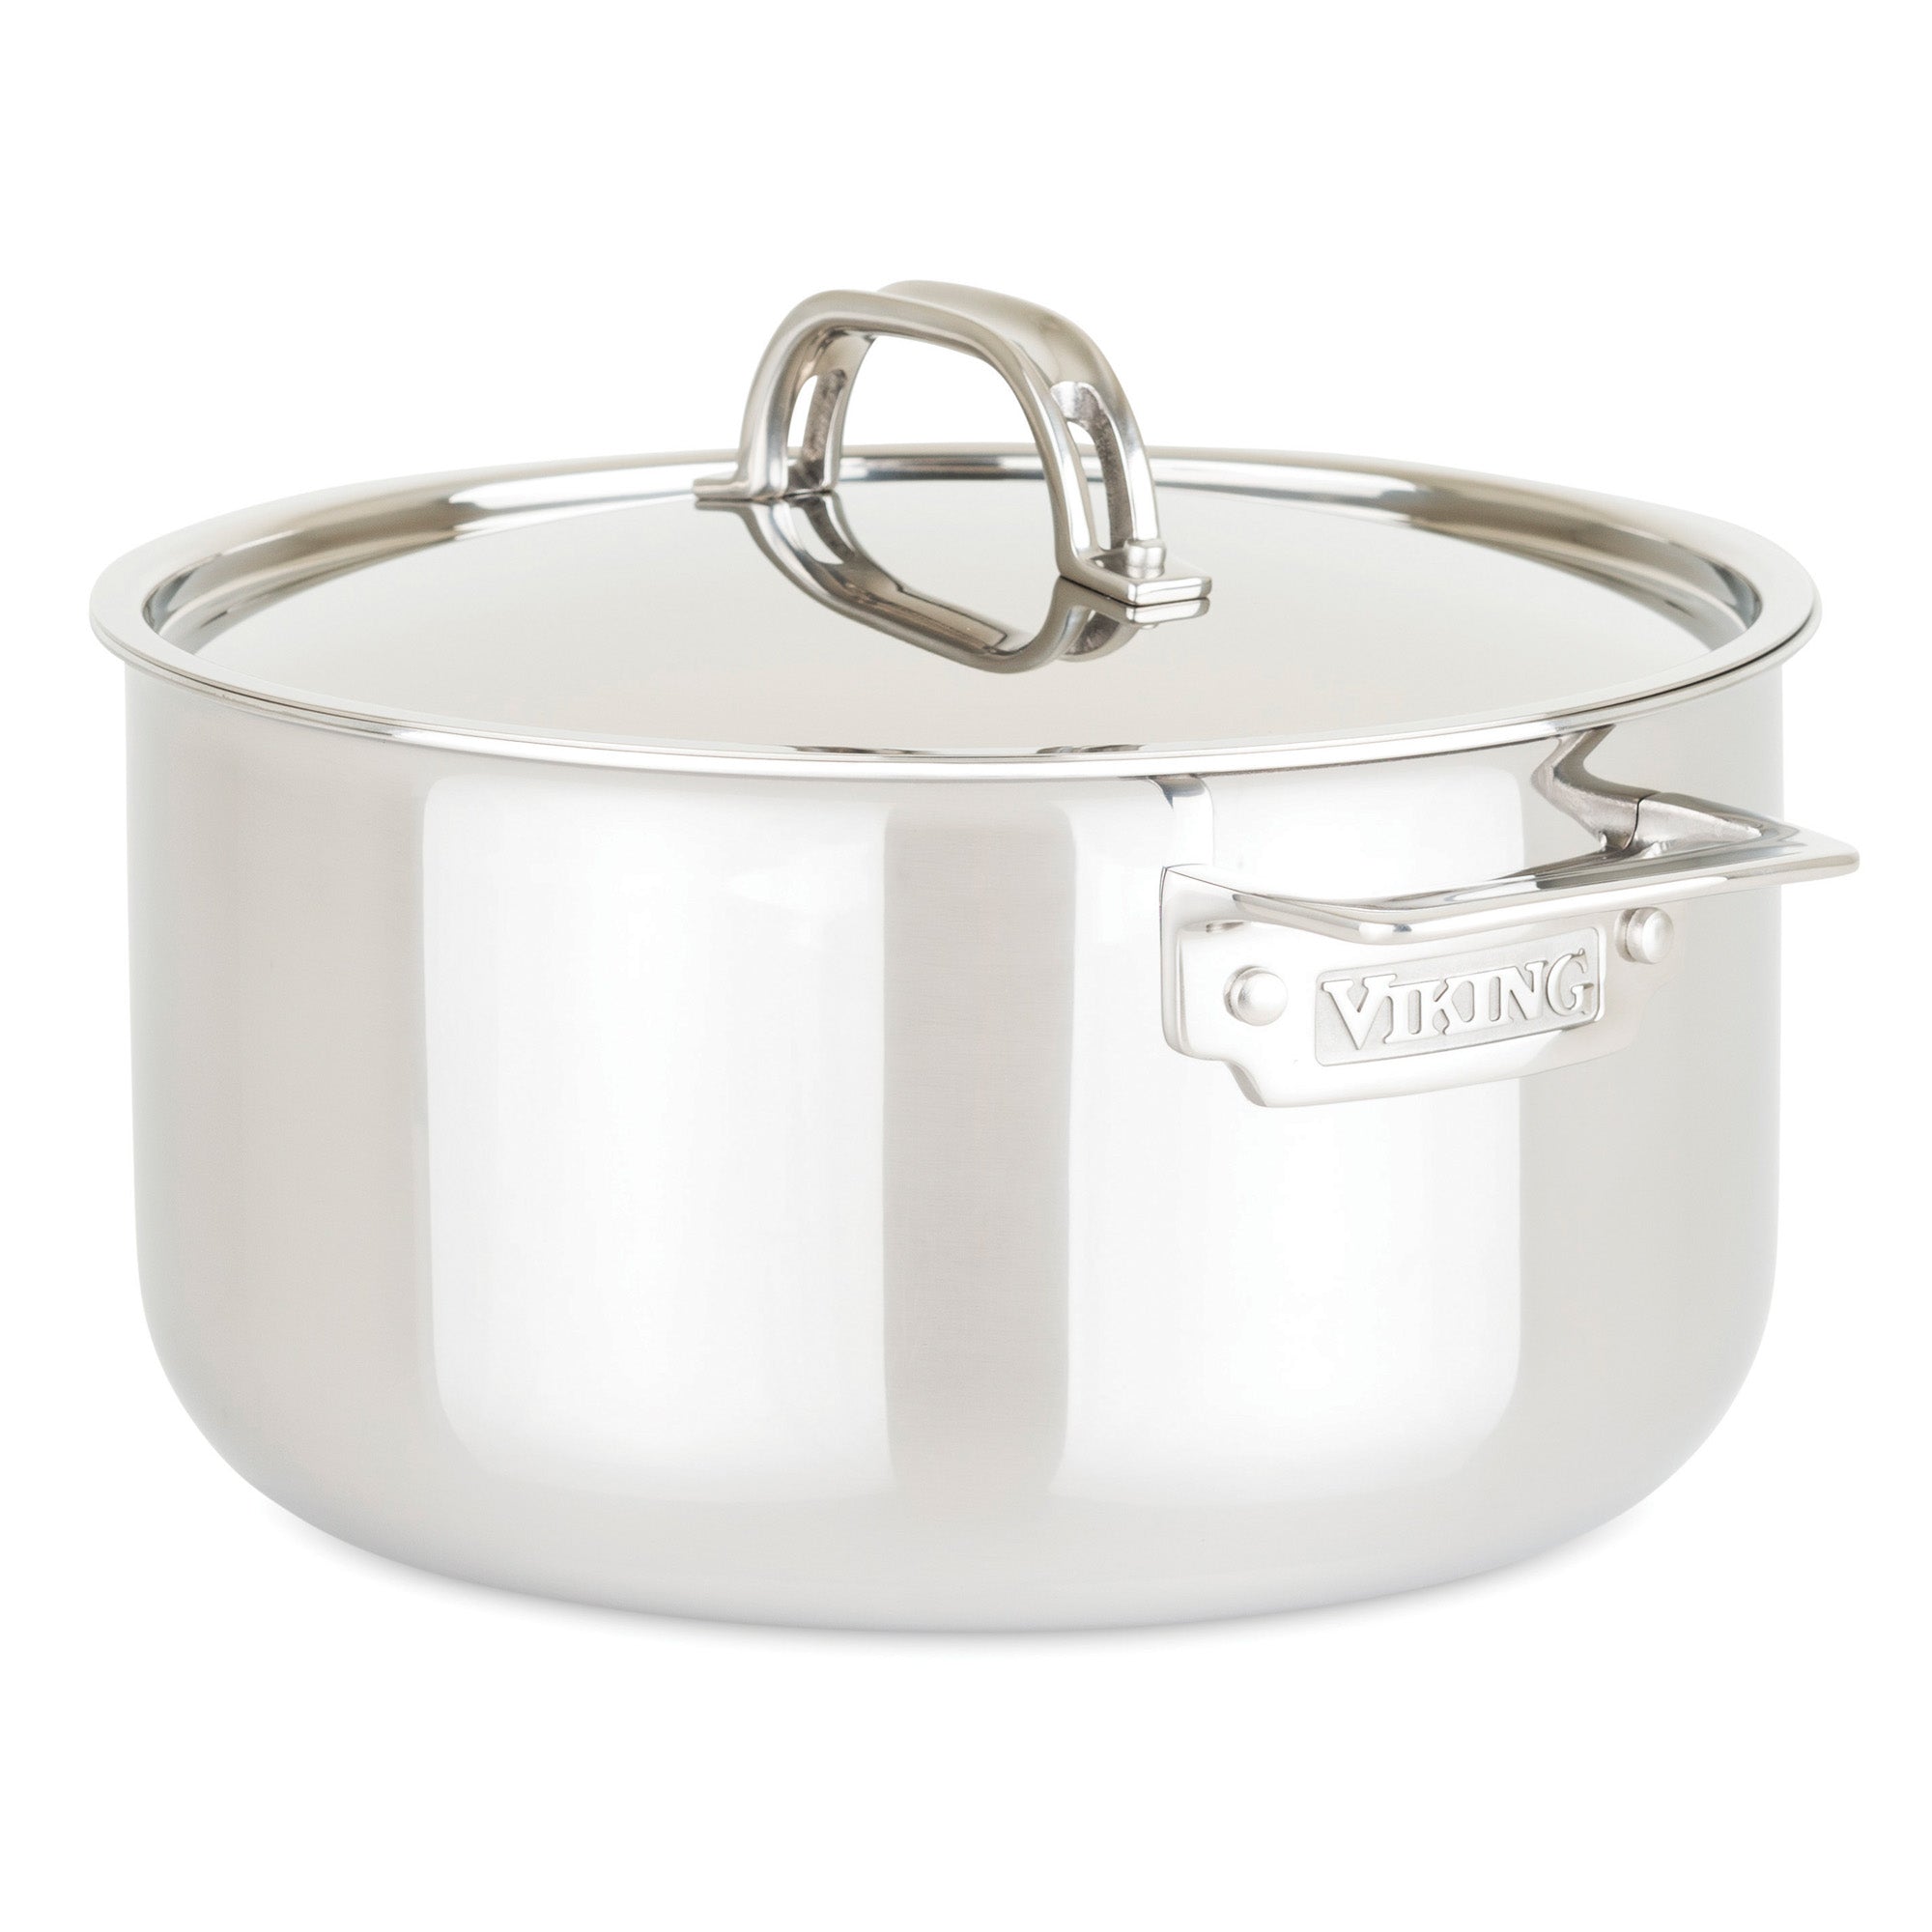 Royal Doulton Professional Cookware Stockpot 7 pieces set(18/10 Stainless  Steel)